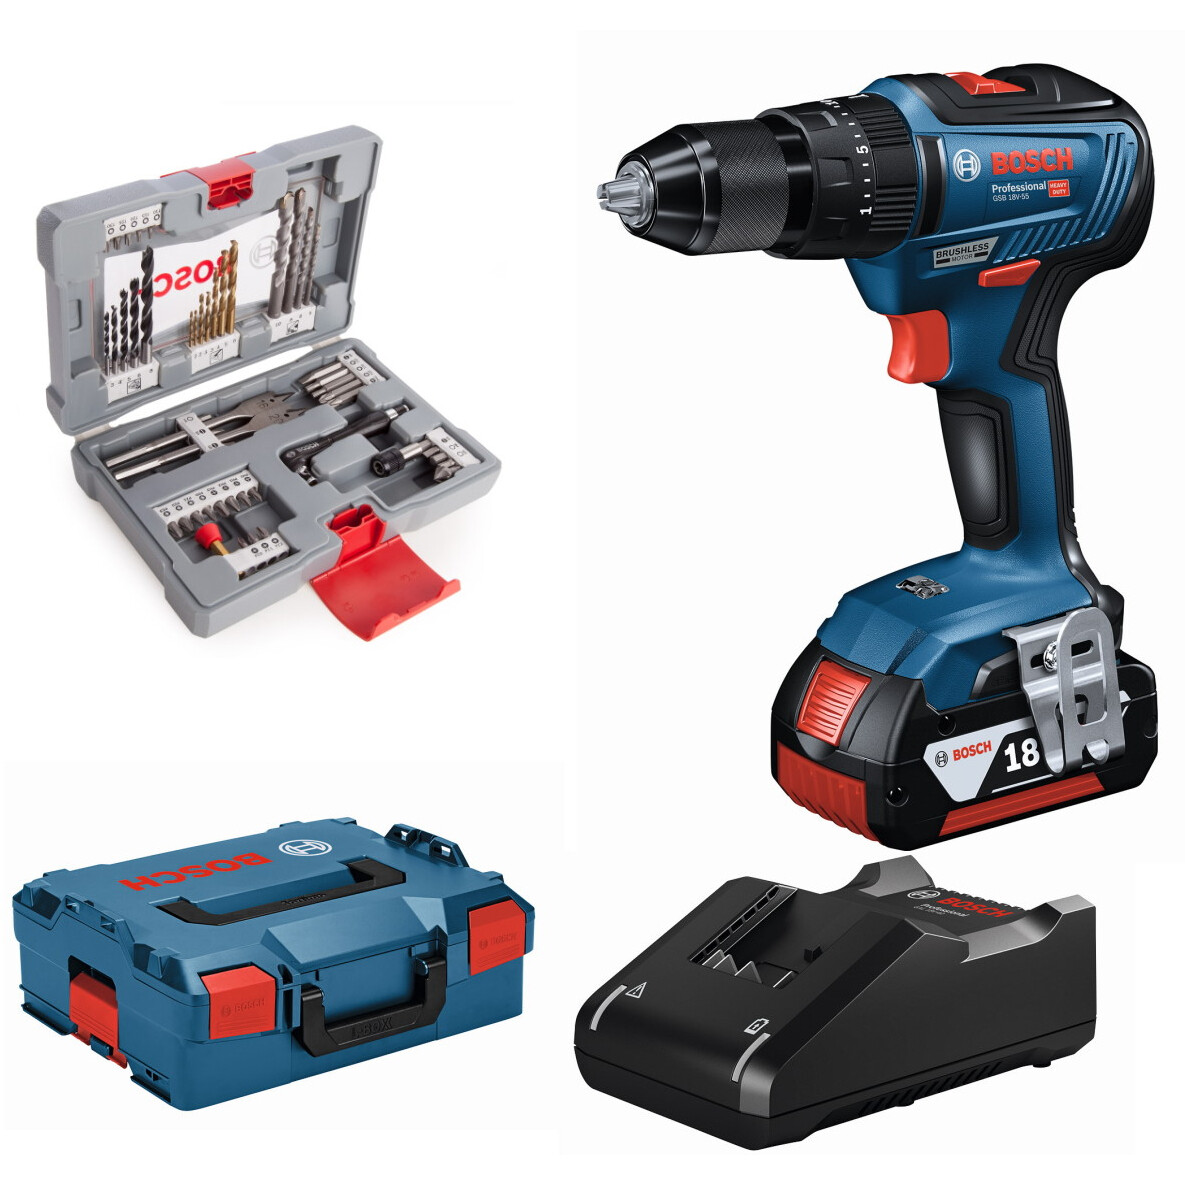 Bosch GSB18V-55 18V Brushless 2-Speed Combi Drill with 1x 2.0Ah Battery in Carry Case with 49 Piece Accessory Set